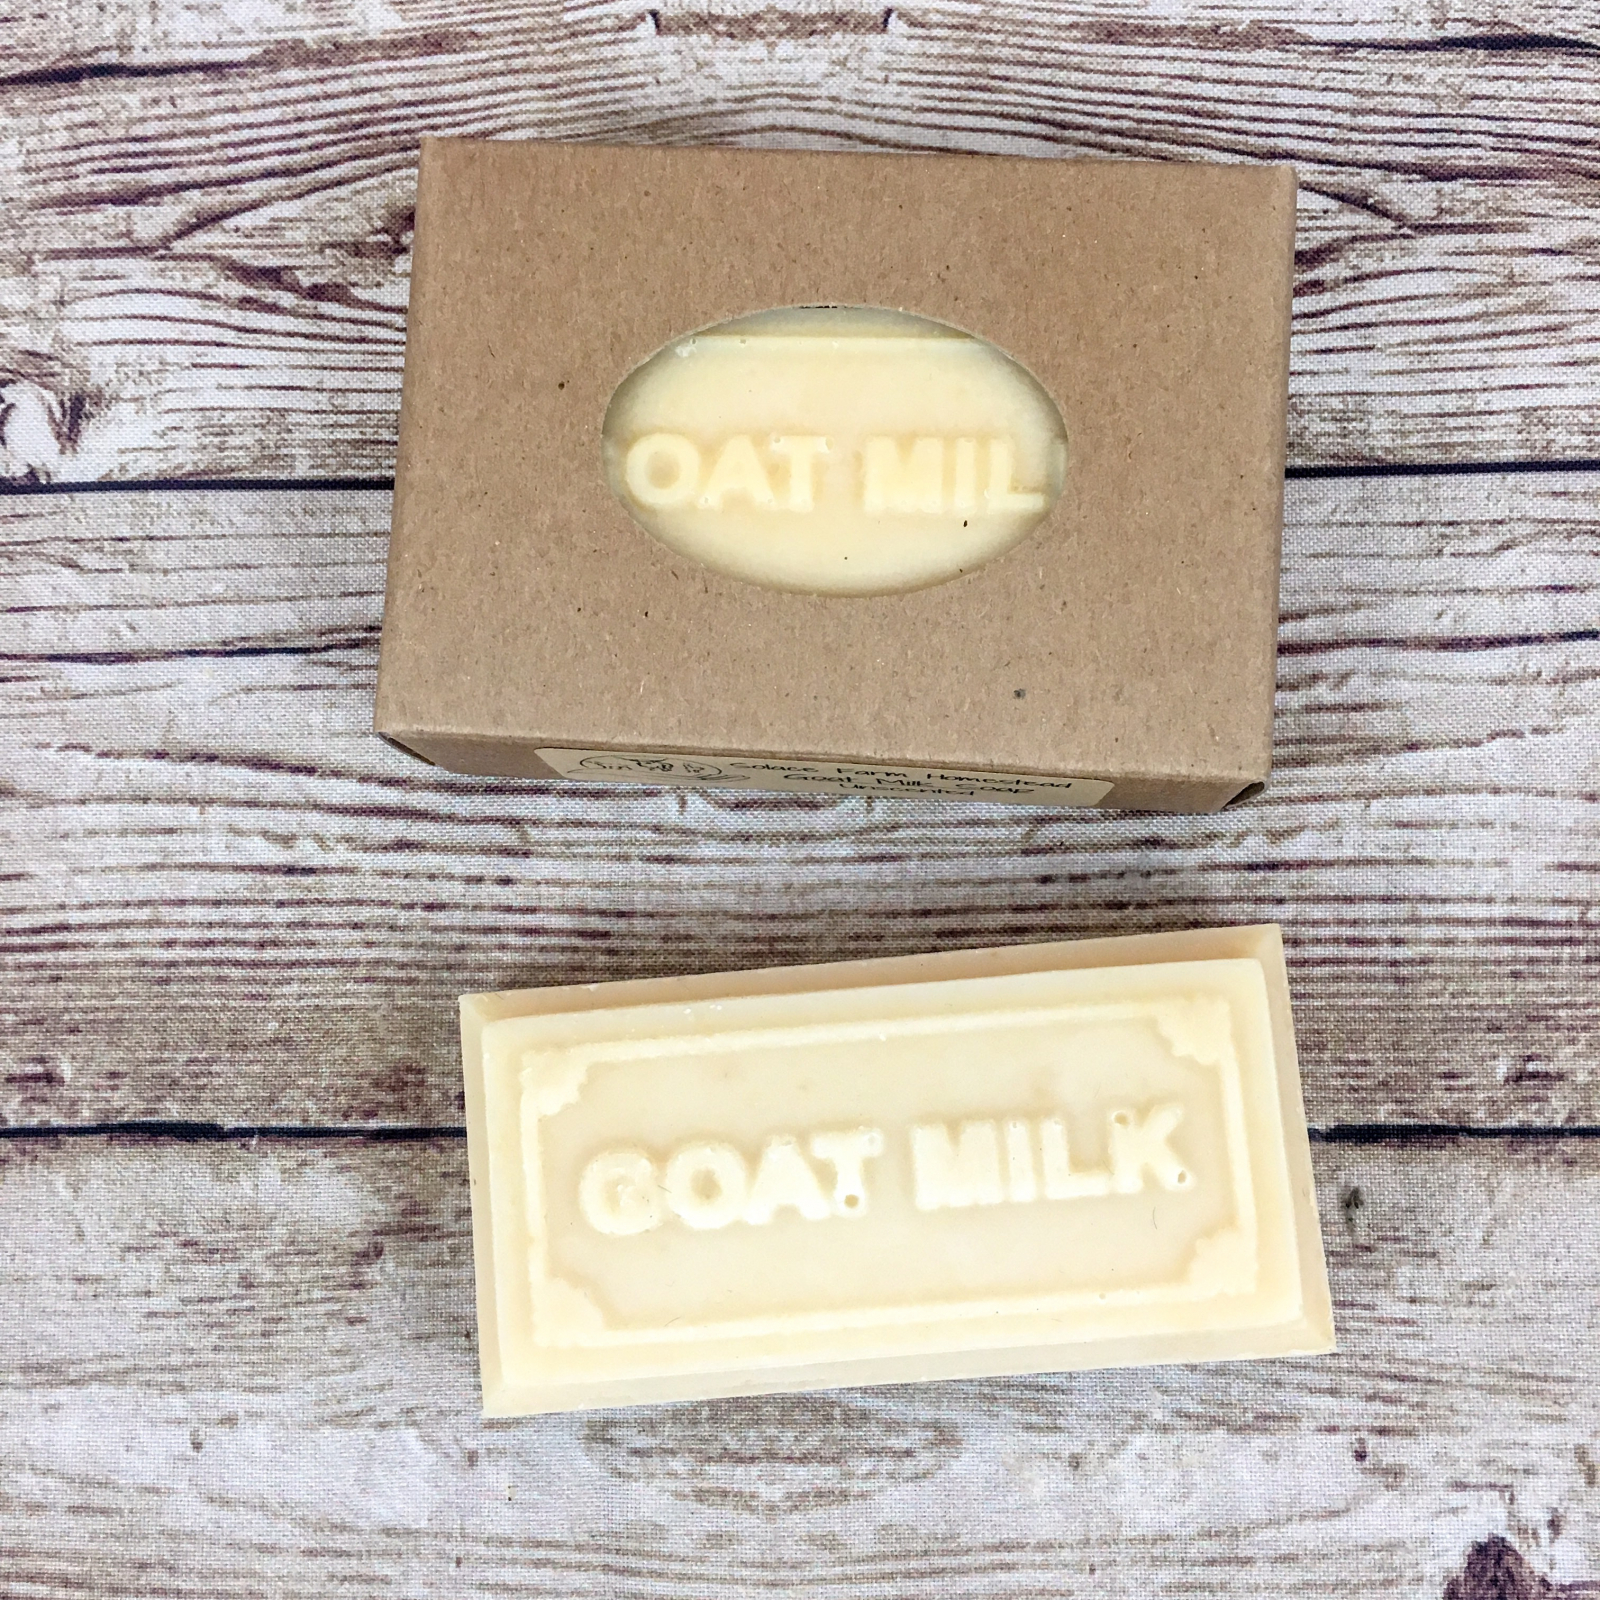 Unscented Goat Milk Soap - All Natural, Handmade with Organic Ingredients – GOAT  Soap